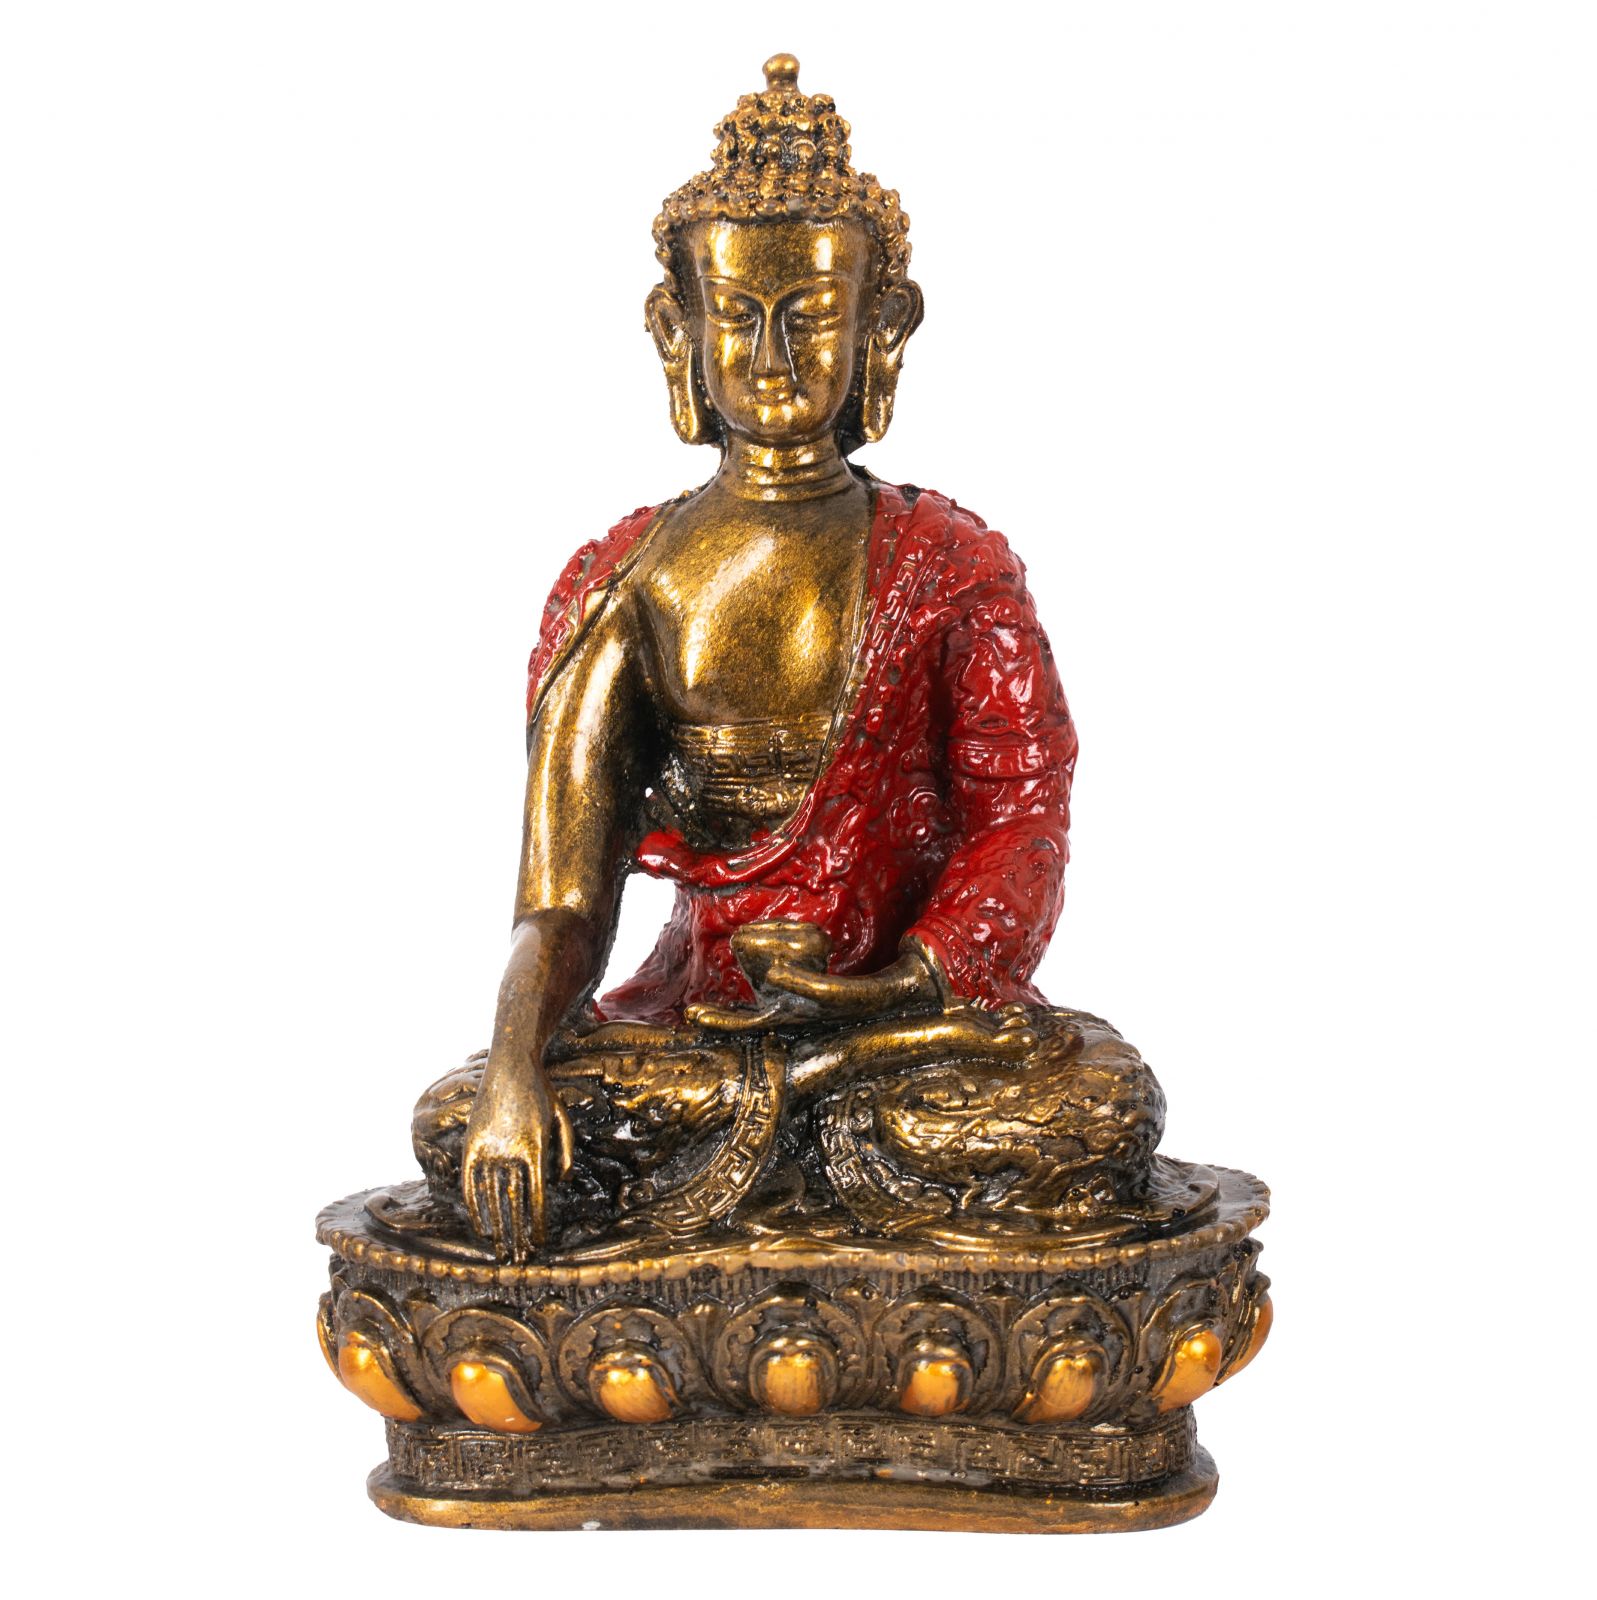 Painted resin statuette Colourful Buddha 28 cm Indonesia